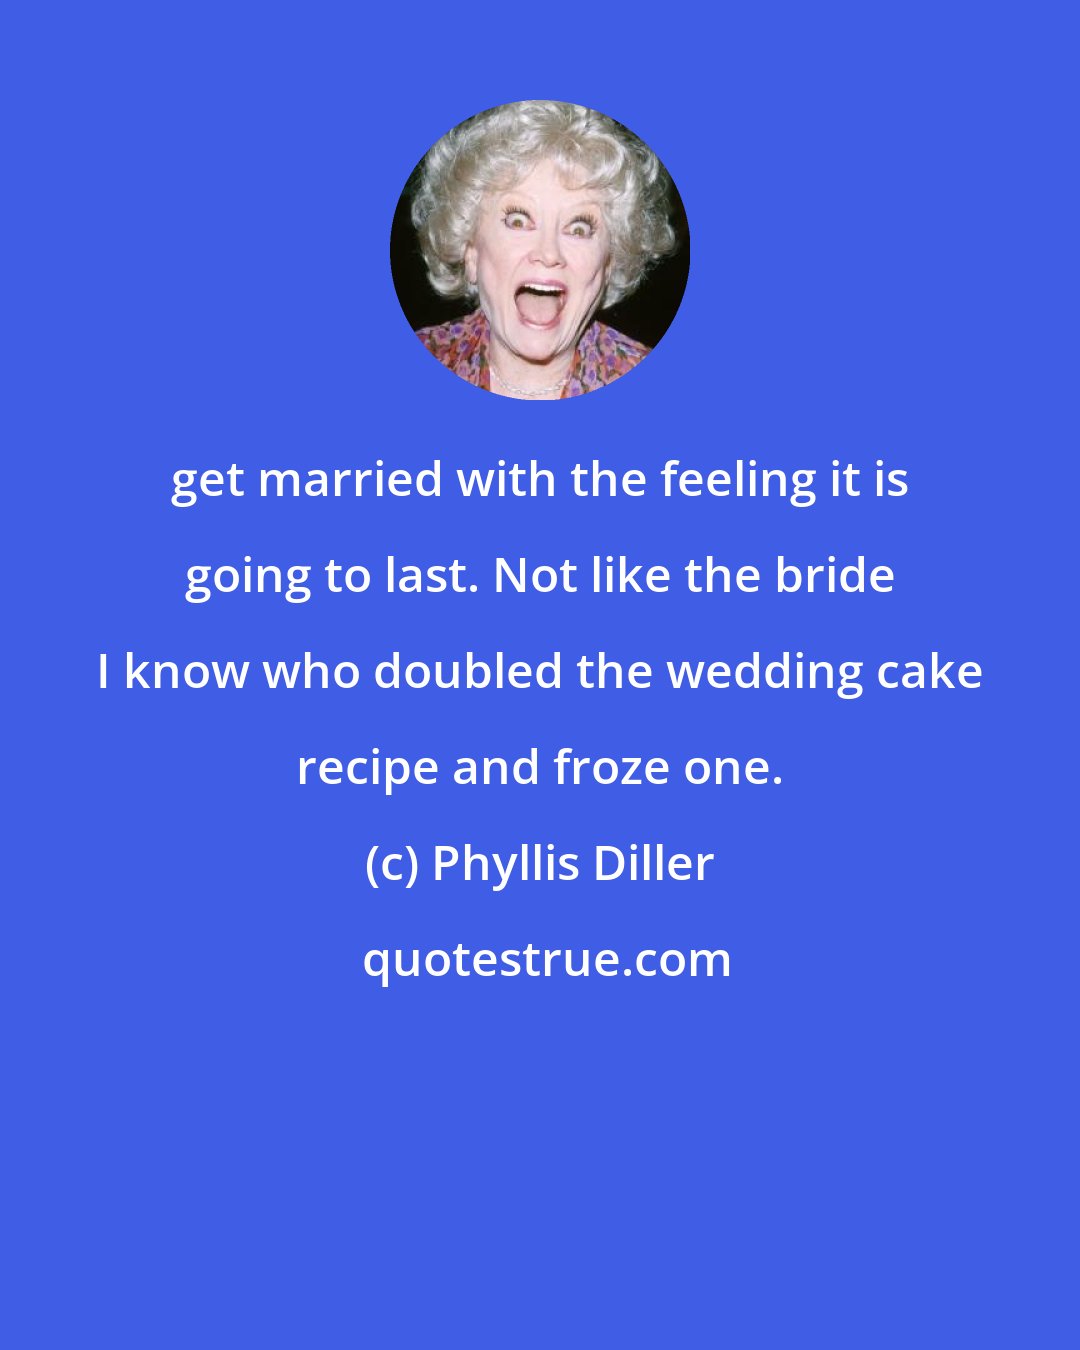 Phyllis Diller: get married with the feeling it is going to last. Not like the bride I know who doubled the wedding cake recipe and froze one.